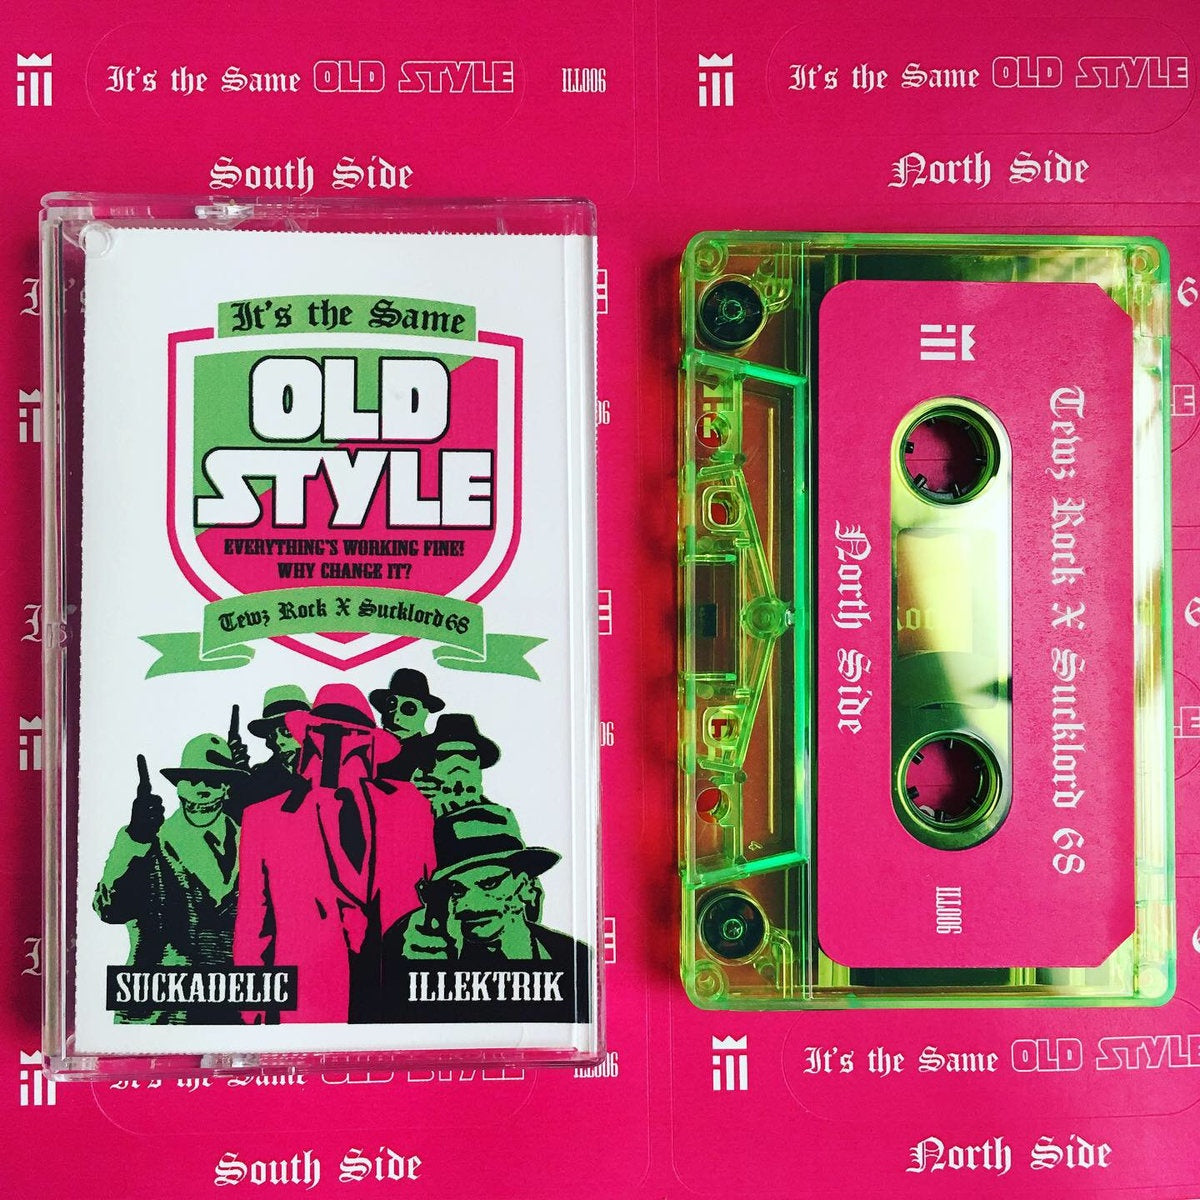 Tewz Rock x Sucklord 68 - Its the Same OLD STYLE - New Cassette 2019 'Chicago Themed Fluorescent Green' Colored Tape - Chicago Beat Tape / Instrumental Hip Hop